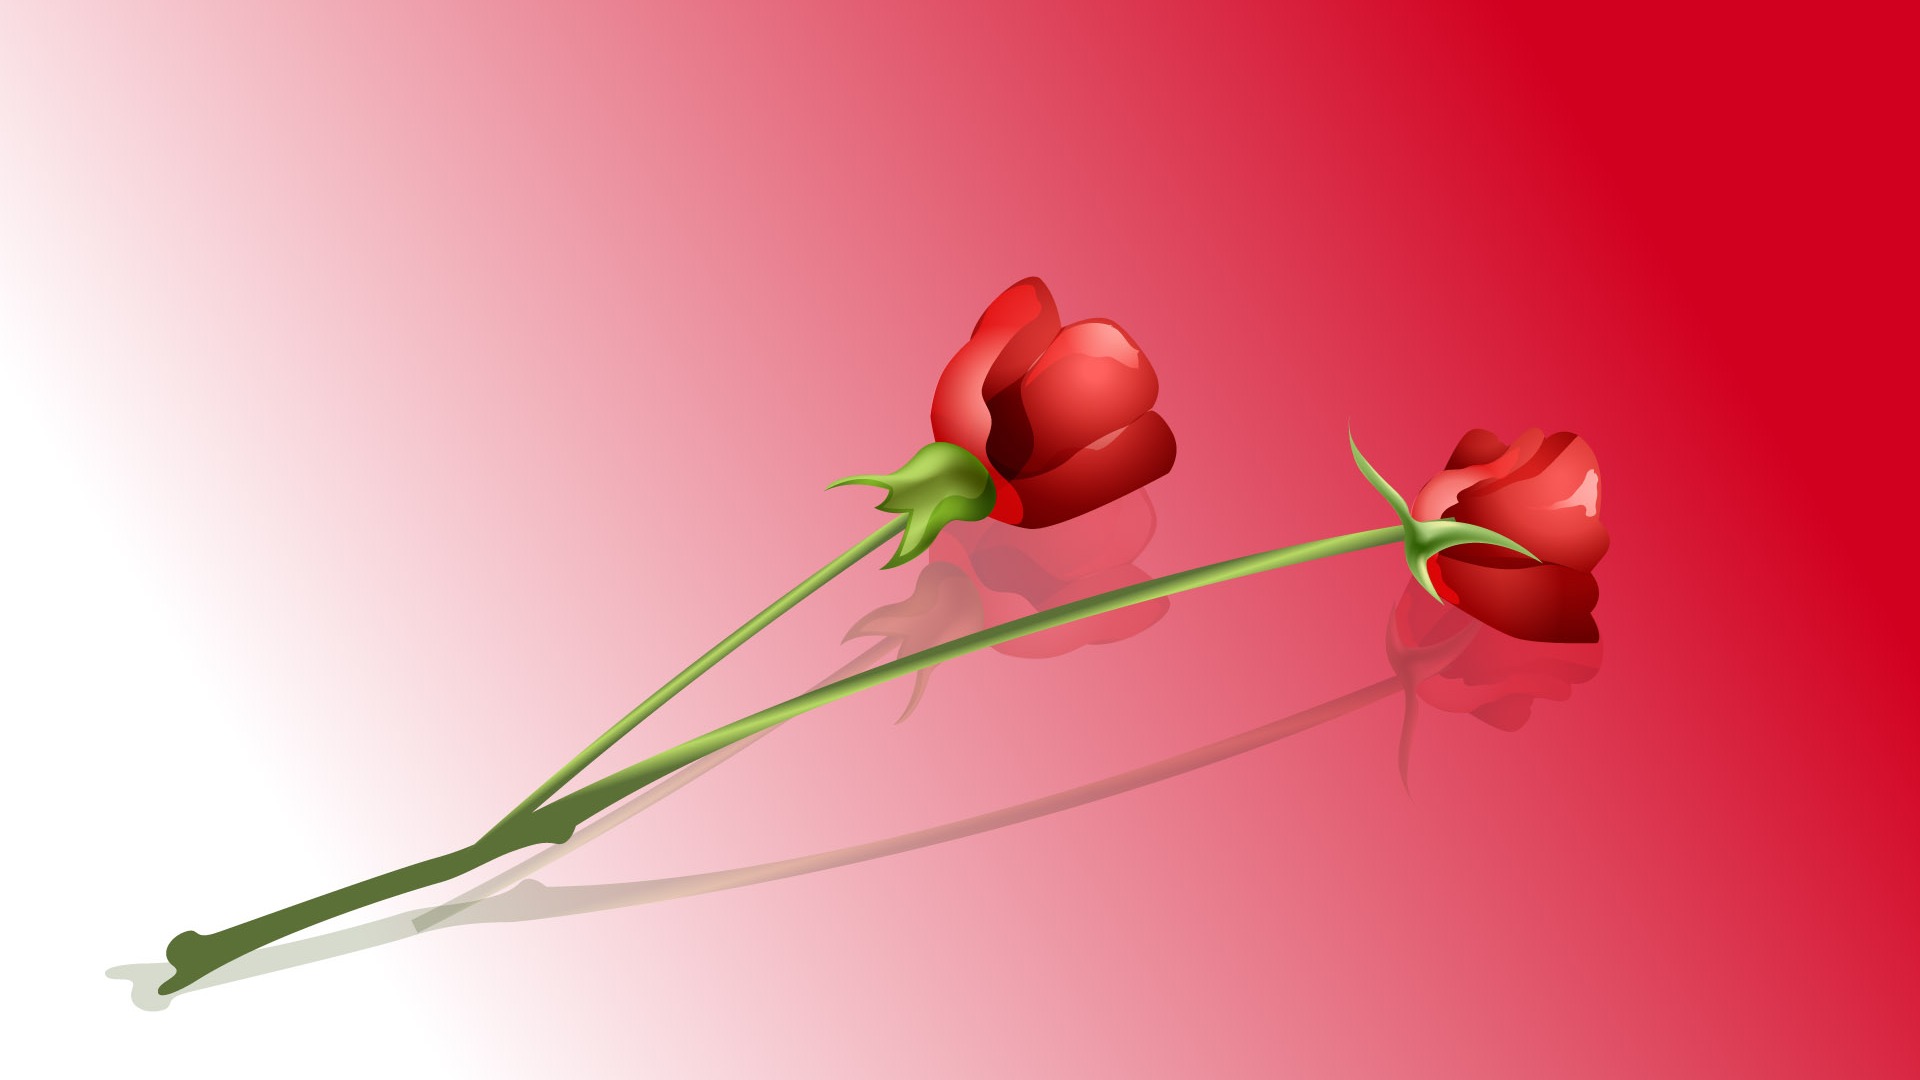 Valentine's Day Love Theme Wallpapers (3) #12 - 1920x1080